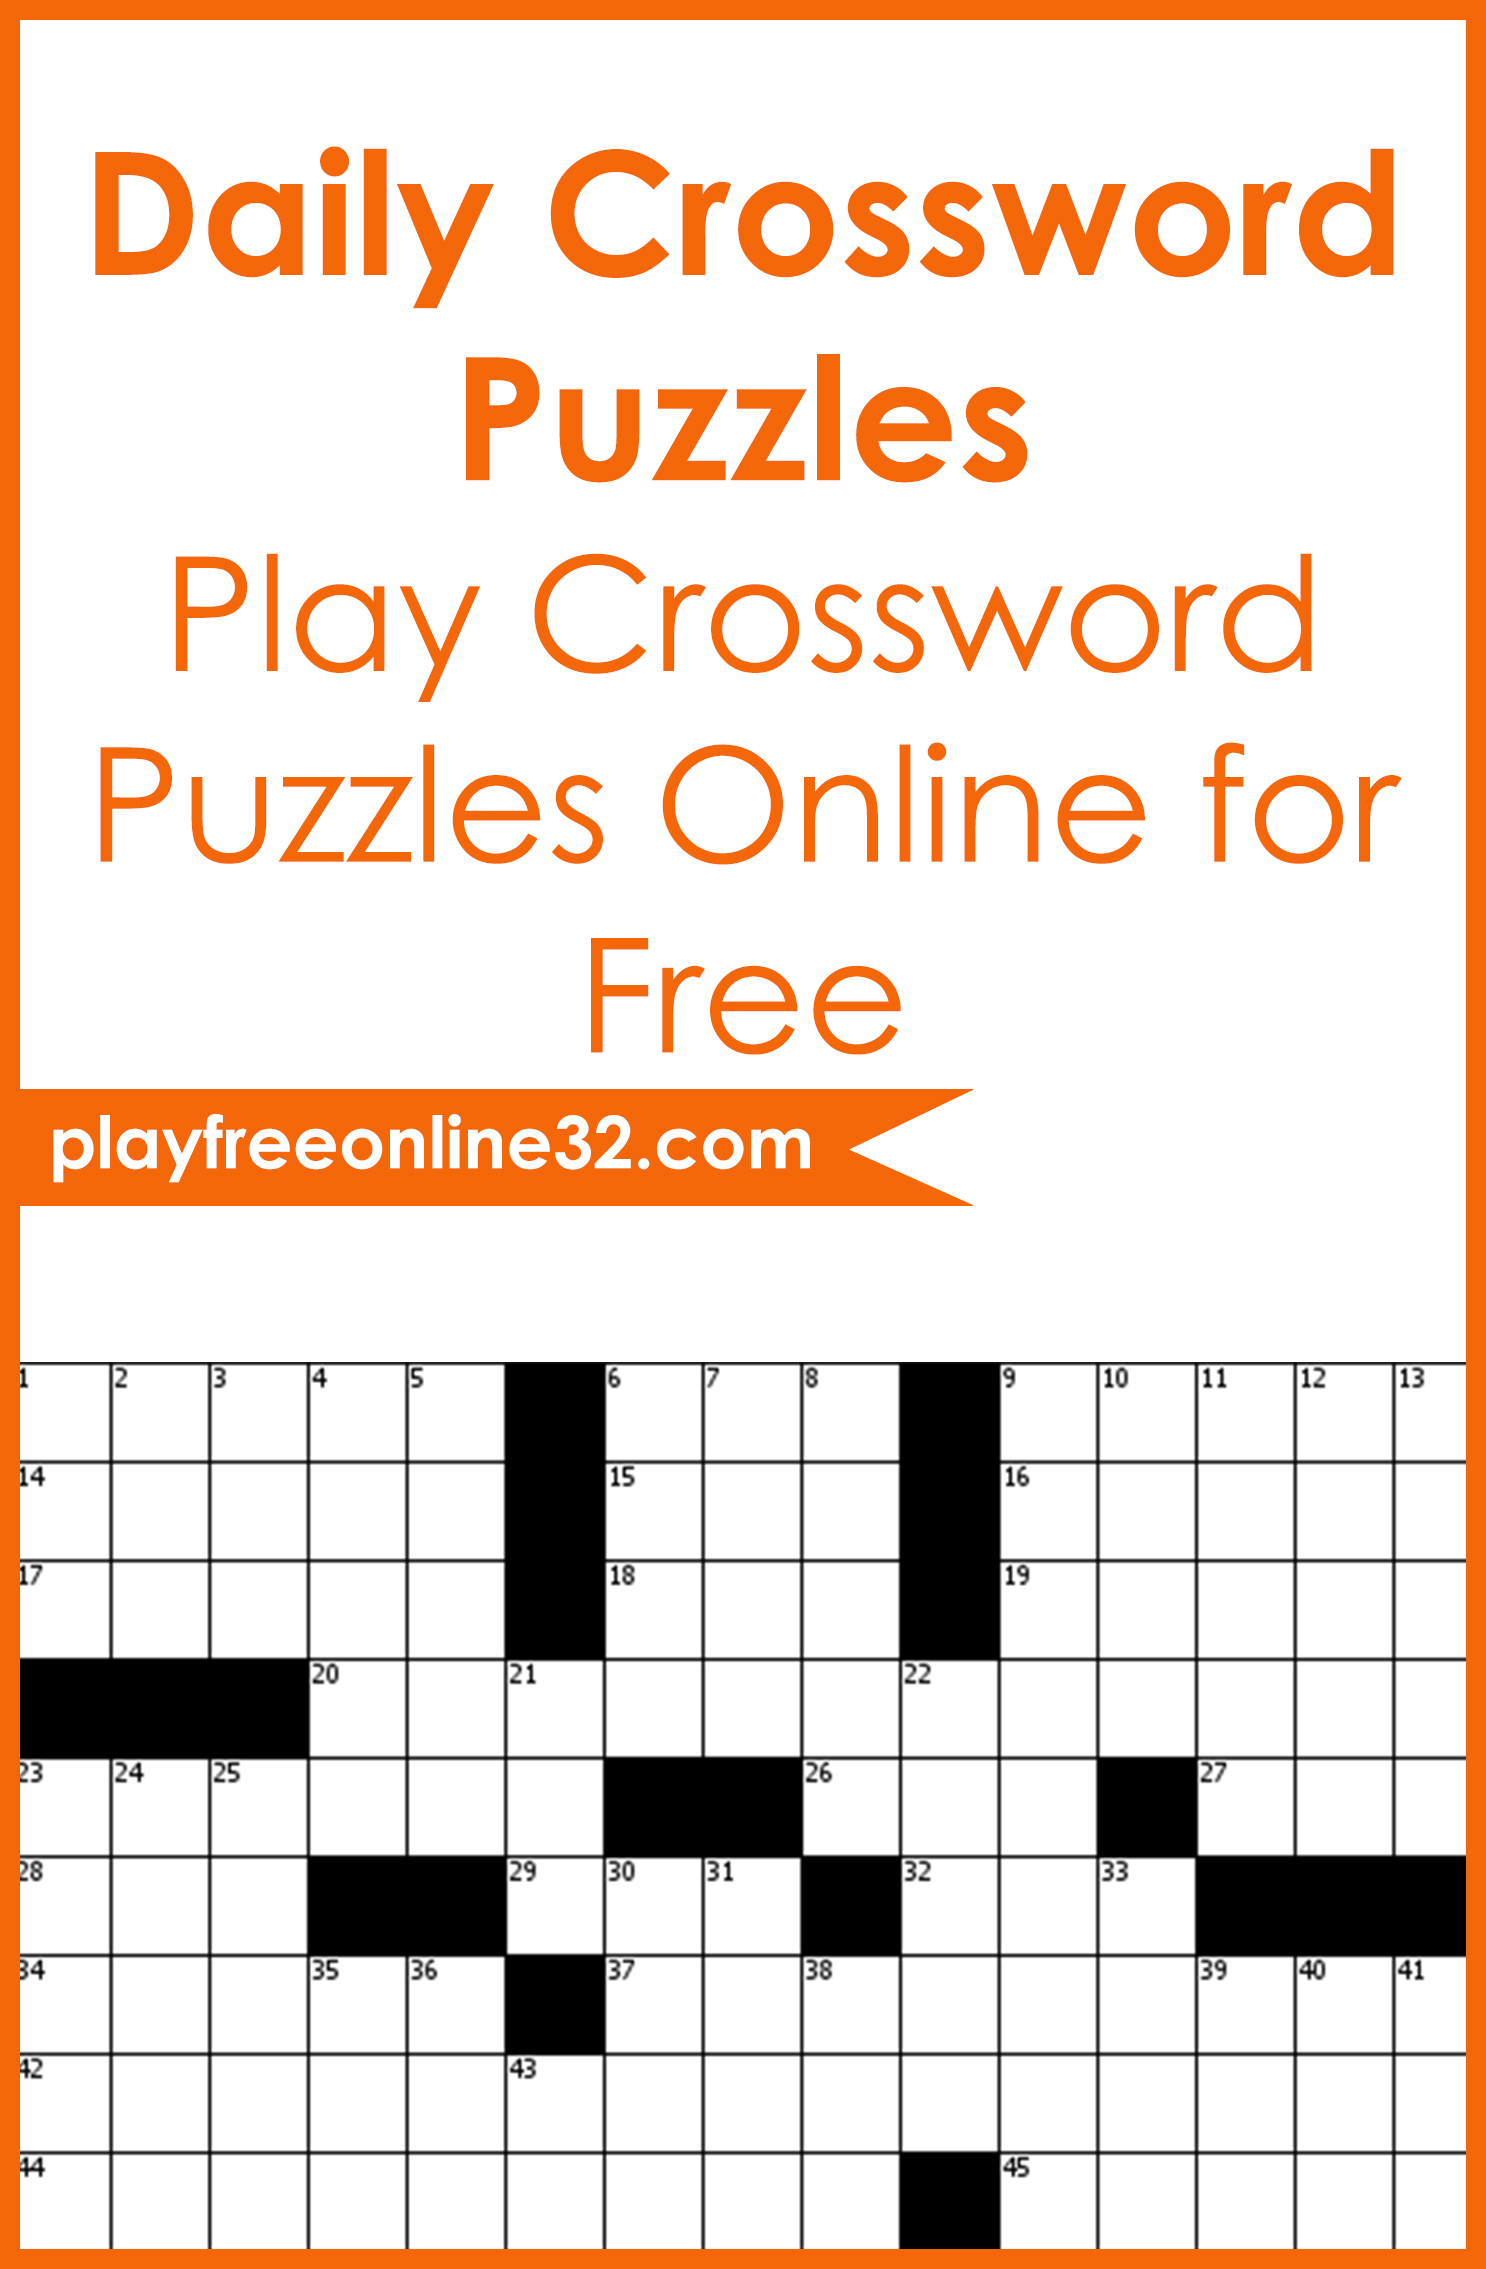 Daily Crossword Puzzles • Play Crossword Puzzles Online for Free